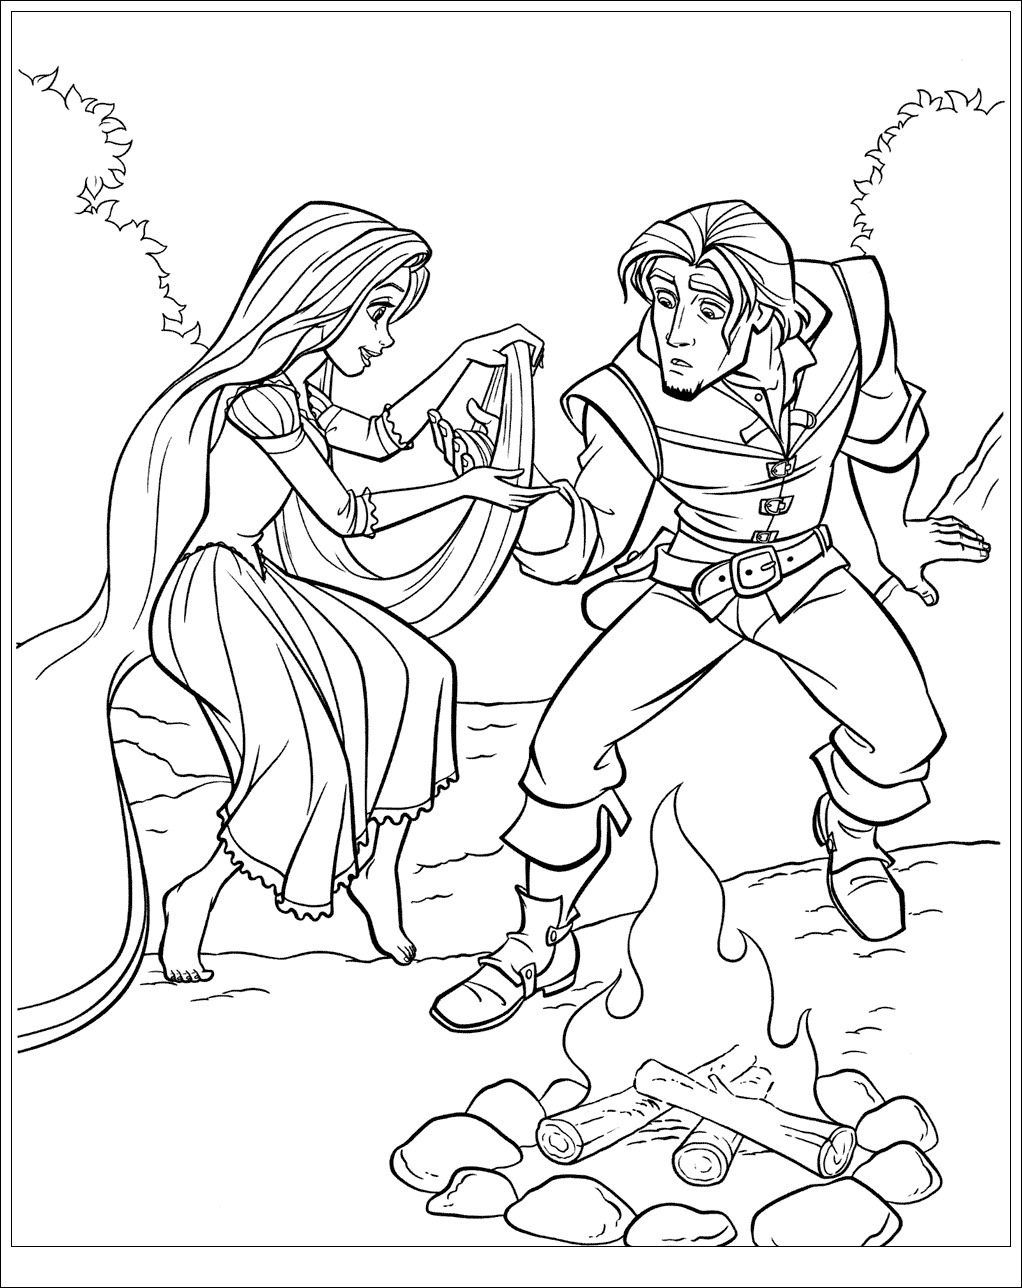 Rapunzel gives Flynn first aid Coloring Pages